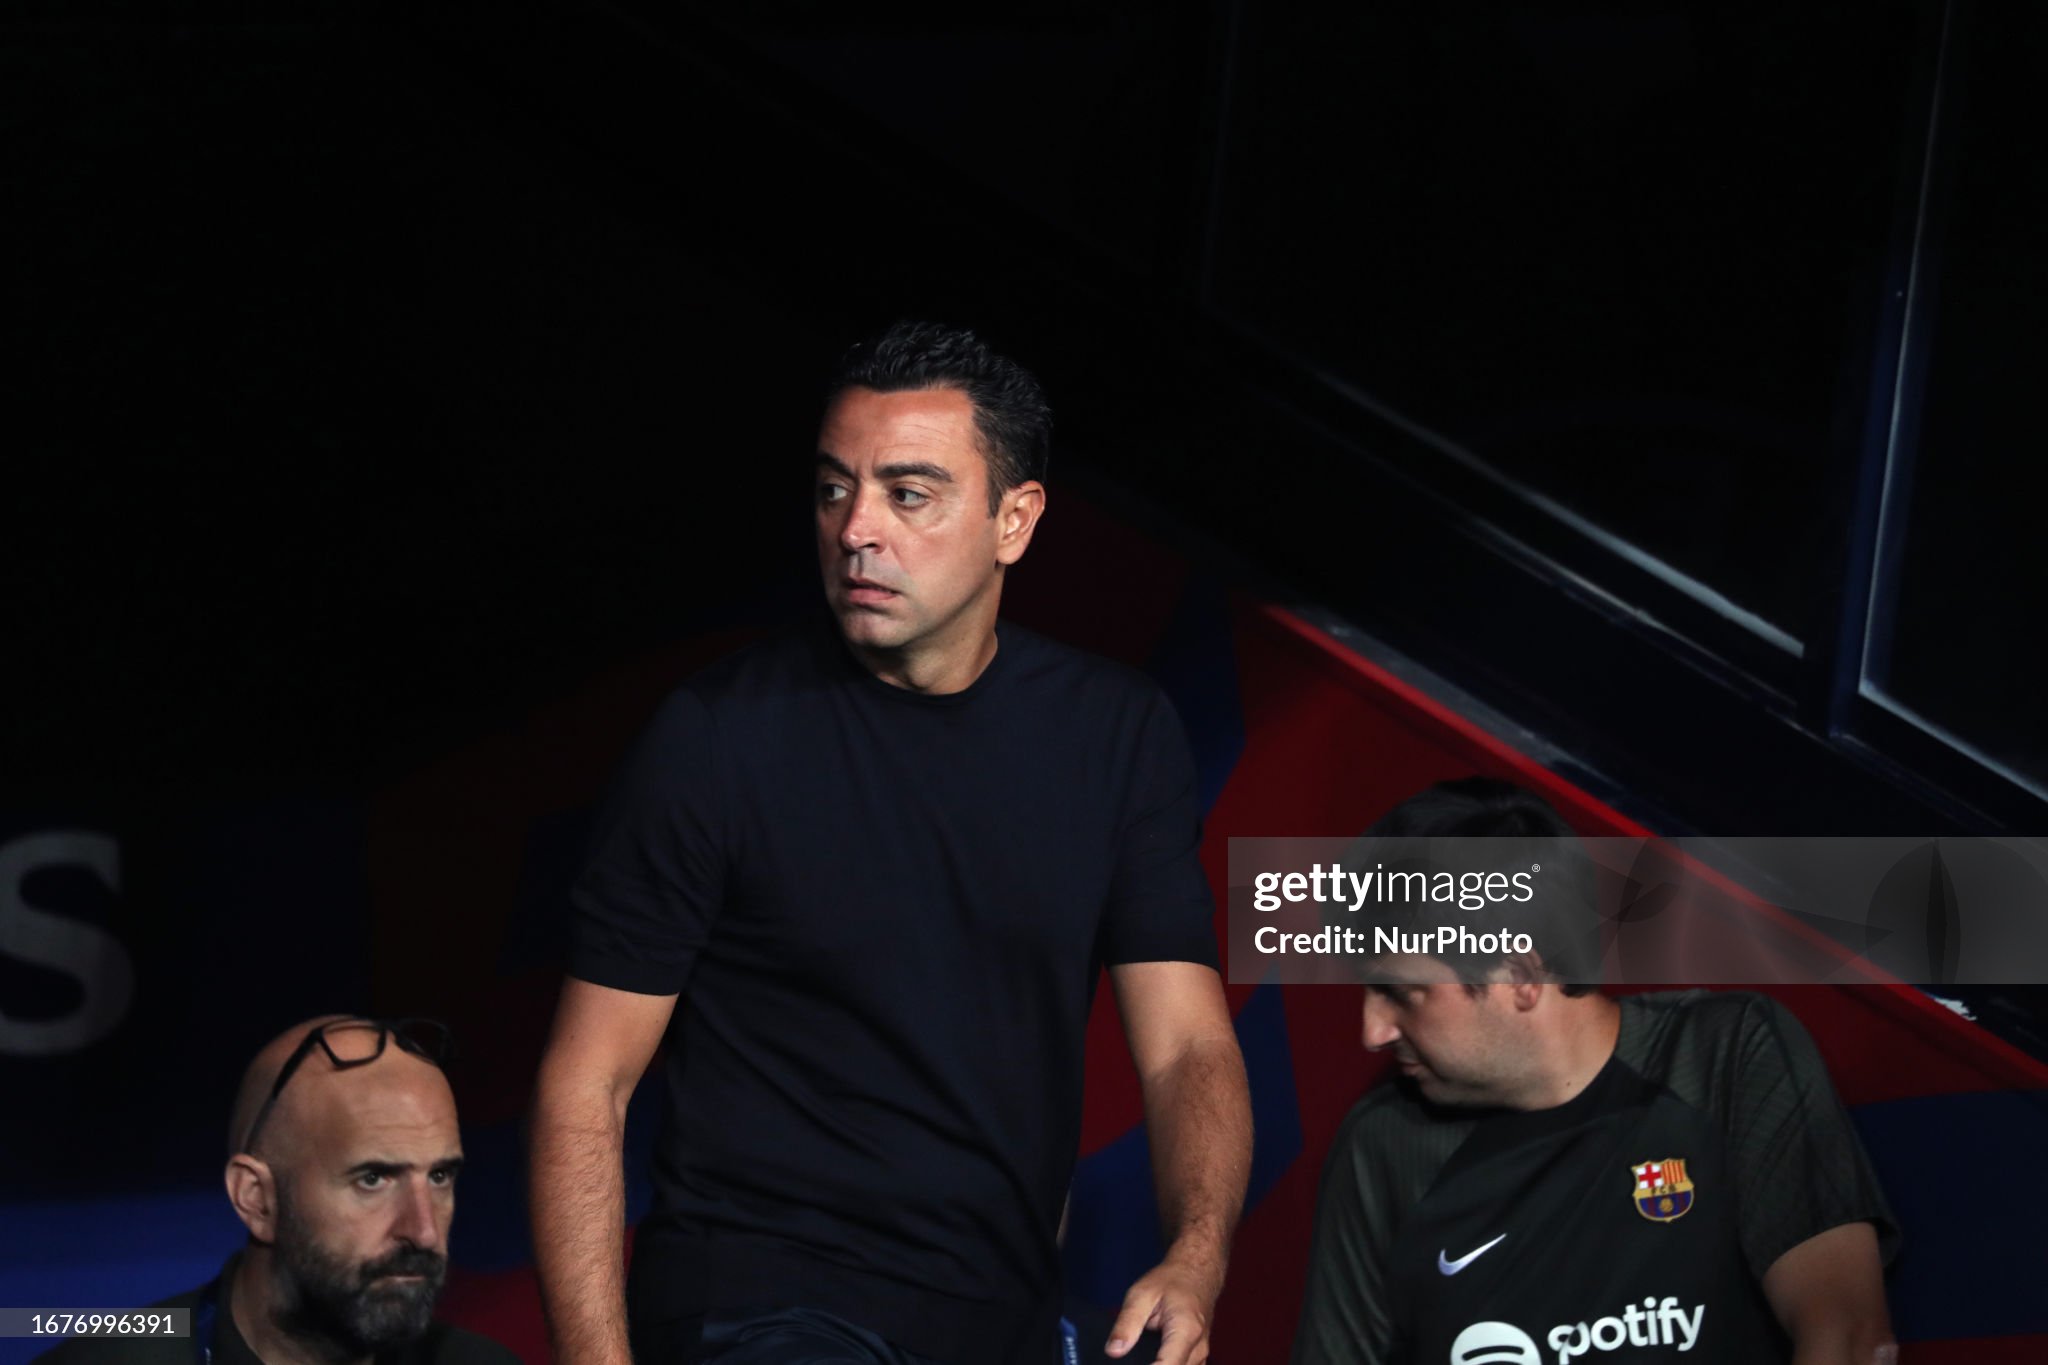 Xavi confirms contract extension at Barça: 'I feel the support of the president'